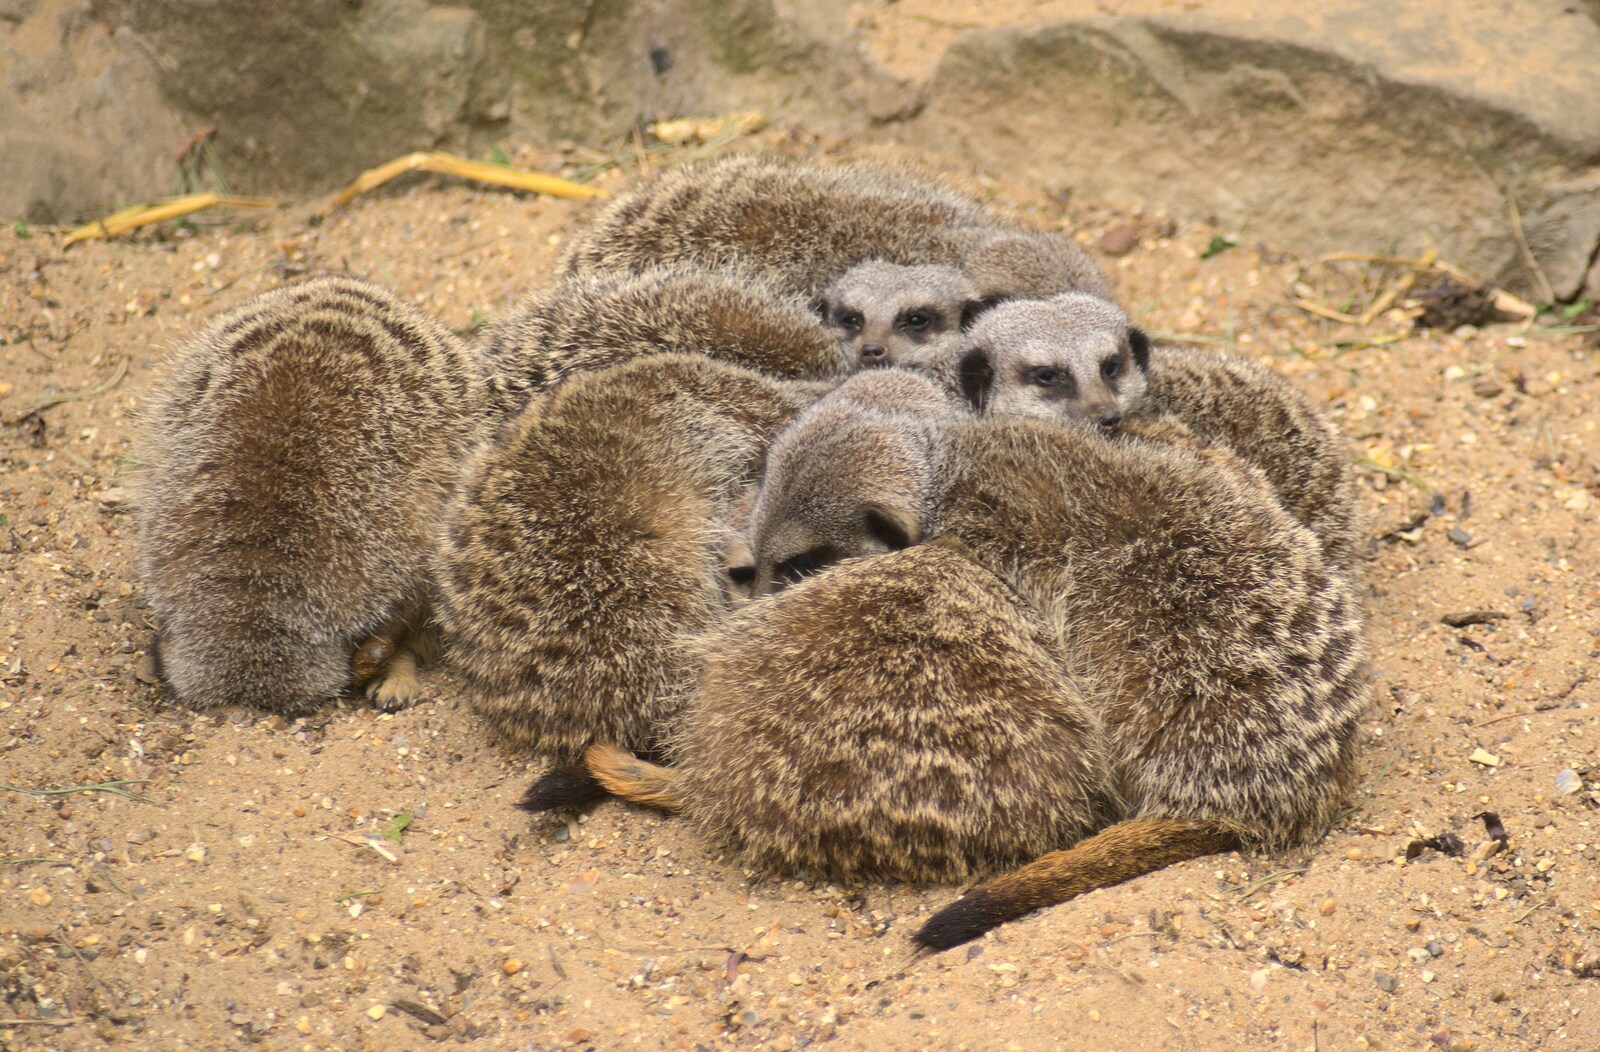 A bundle of Meerkats from Another Day at the Zoo, Banham, Norfolk - 2nd May 2011